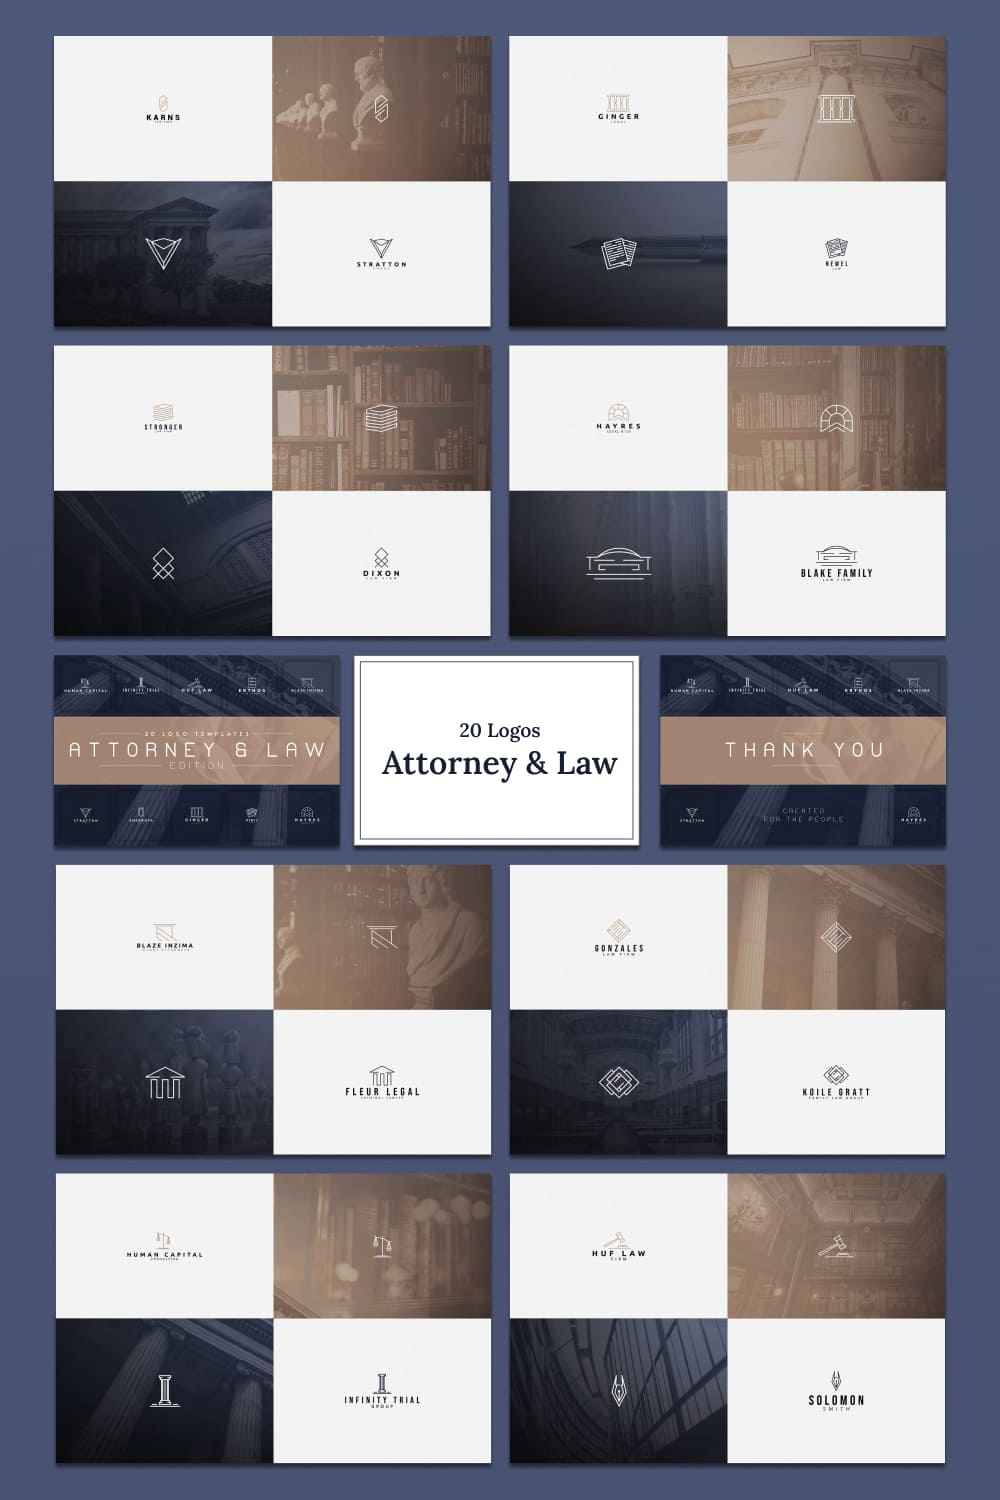 20 logos attorney law template.